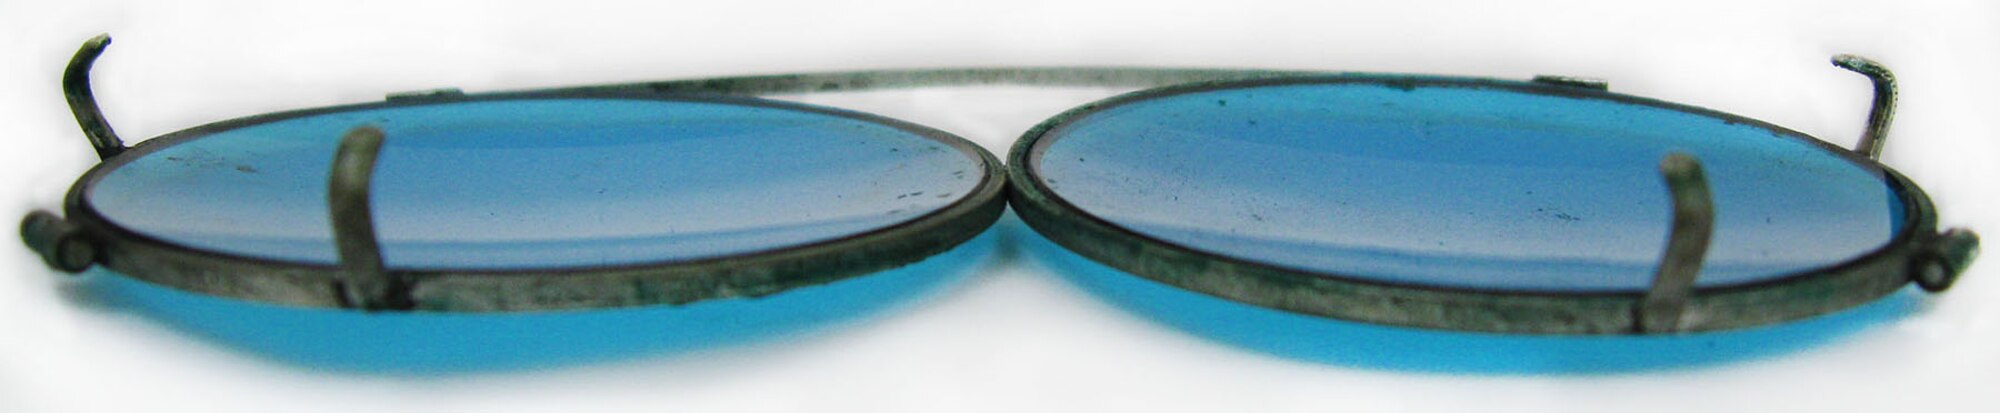 These blue-tinted clip-on sunglasses were worn by 1st Lt. Carroll DeWitt McClung with his prescription eyeglasses. They are approximately 3-3/8 - 4 inches in width and were manufactured to stretch to fit and clip onto various size prescription eyeglass frames. This style of clip-on sunglasses is still manufactured and used today. (U.S. Air Force photo)